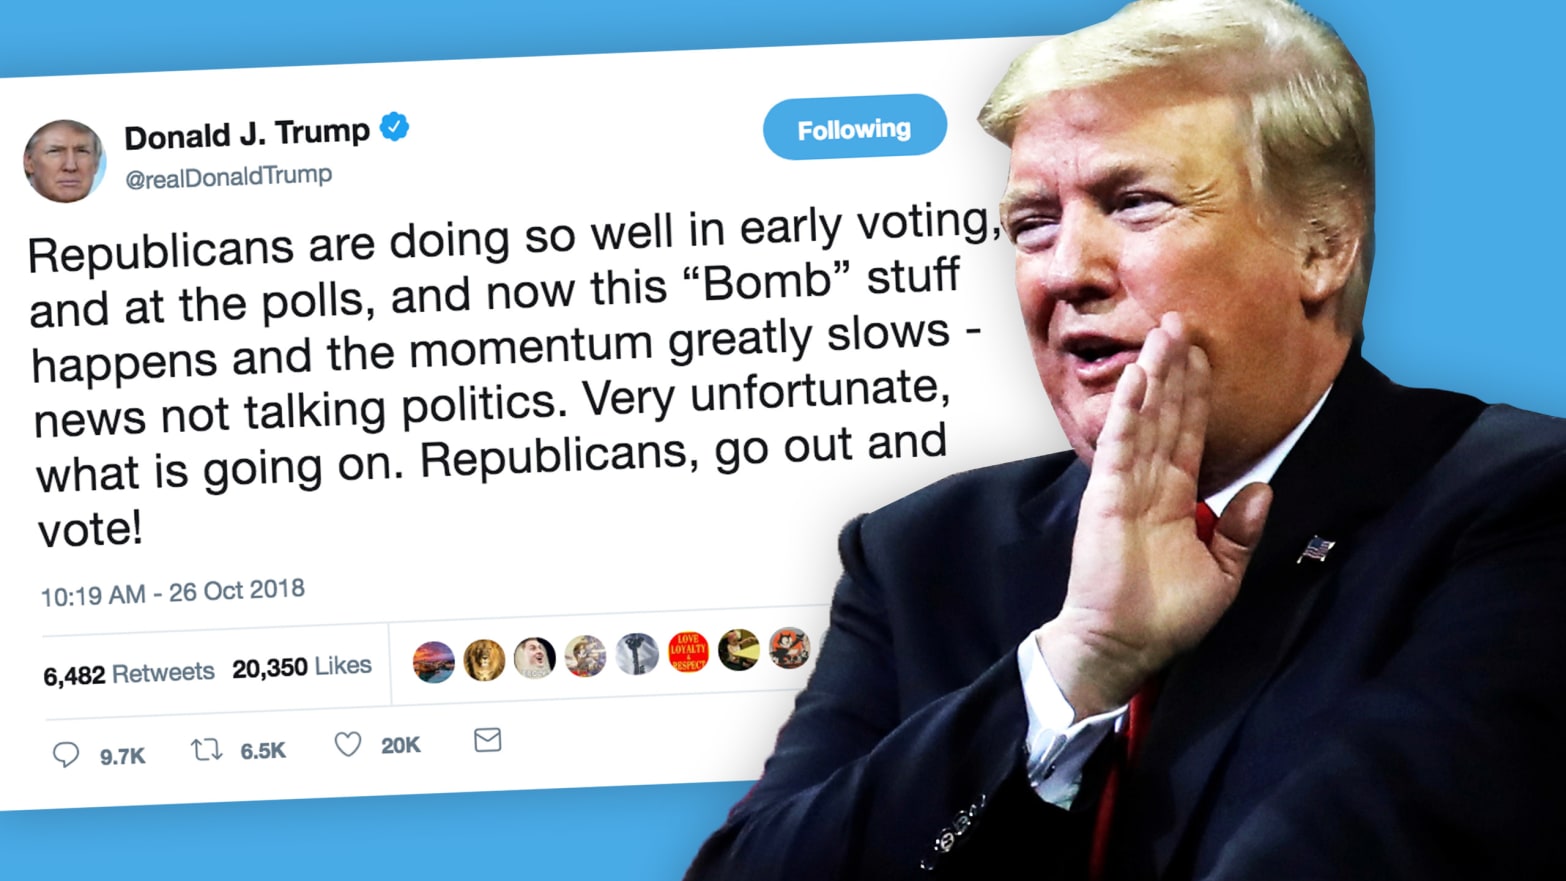 Trump Questions Whether Bombs Were False-Flag Operation